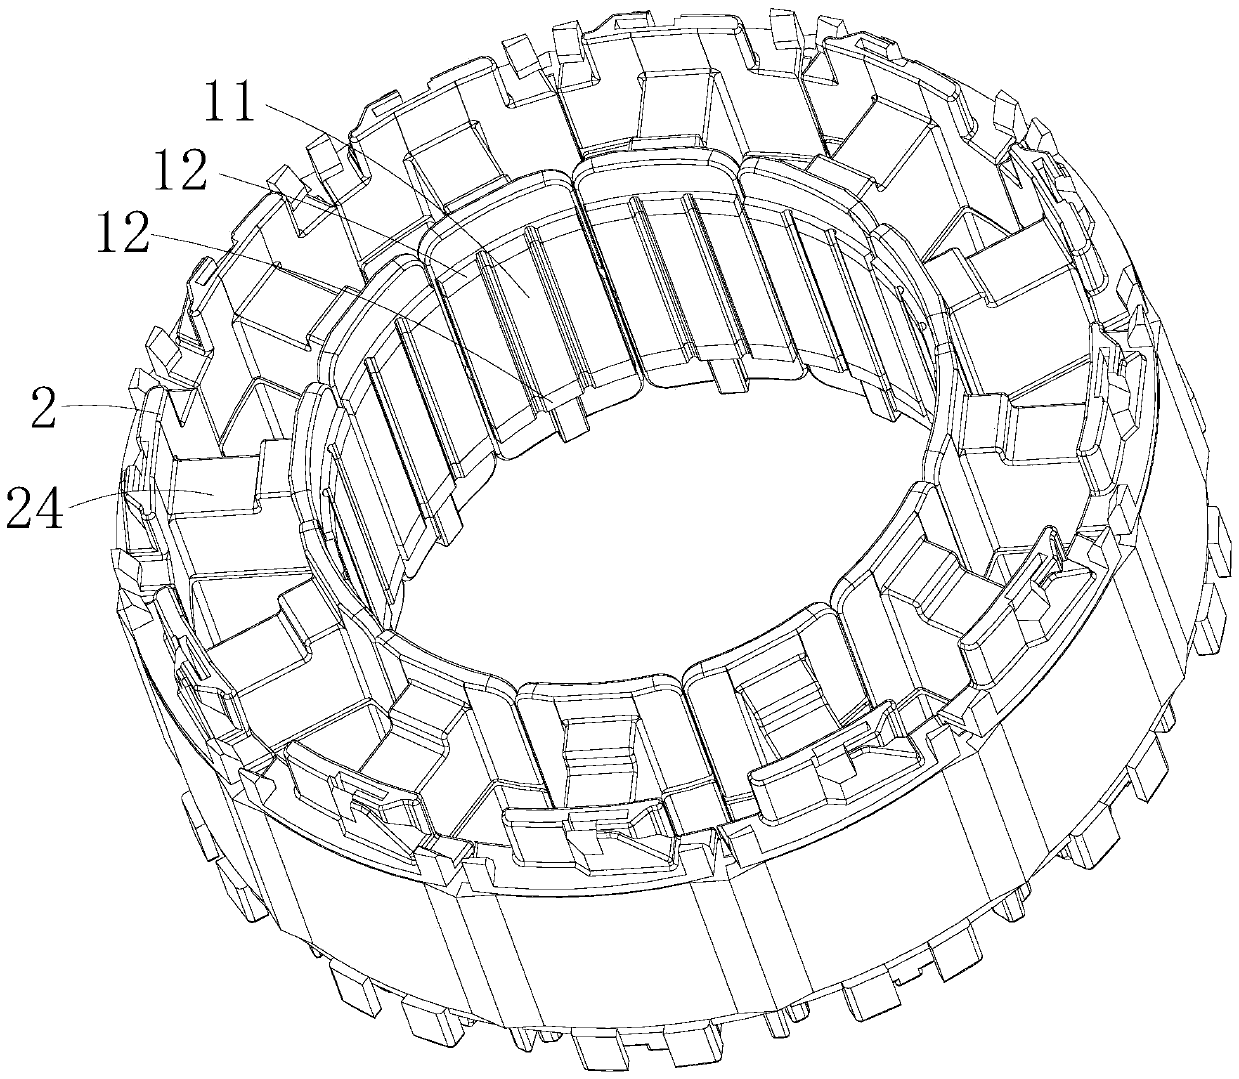 Stator core components and stator, permanent magnet motor